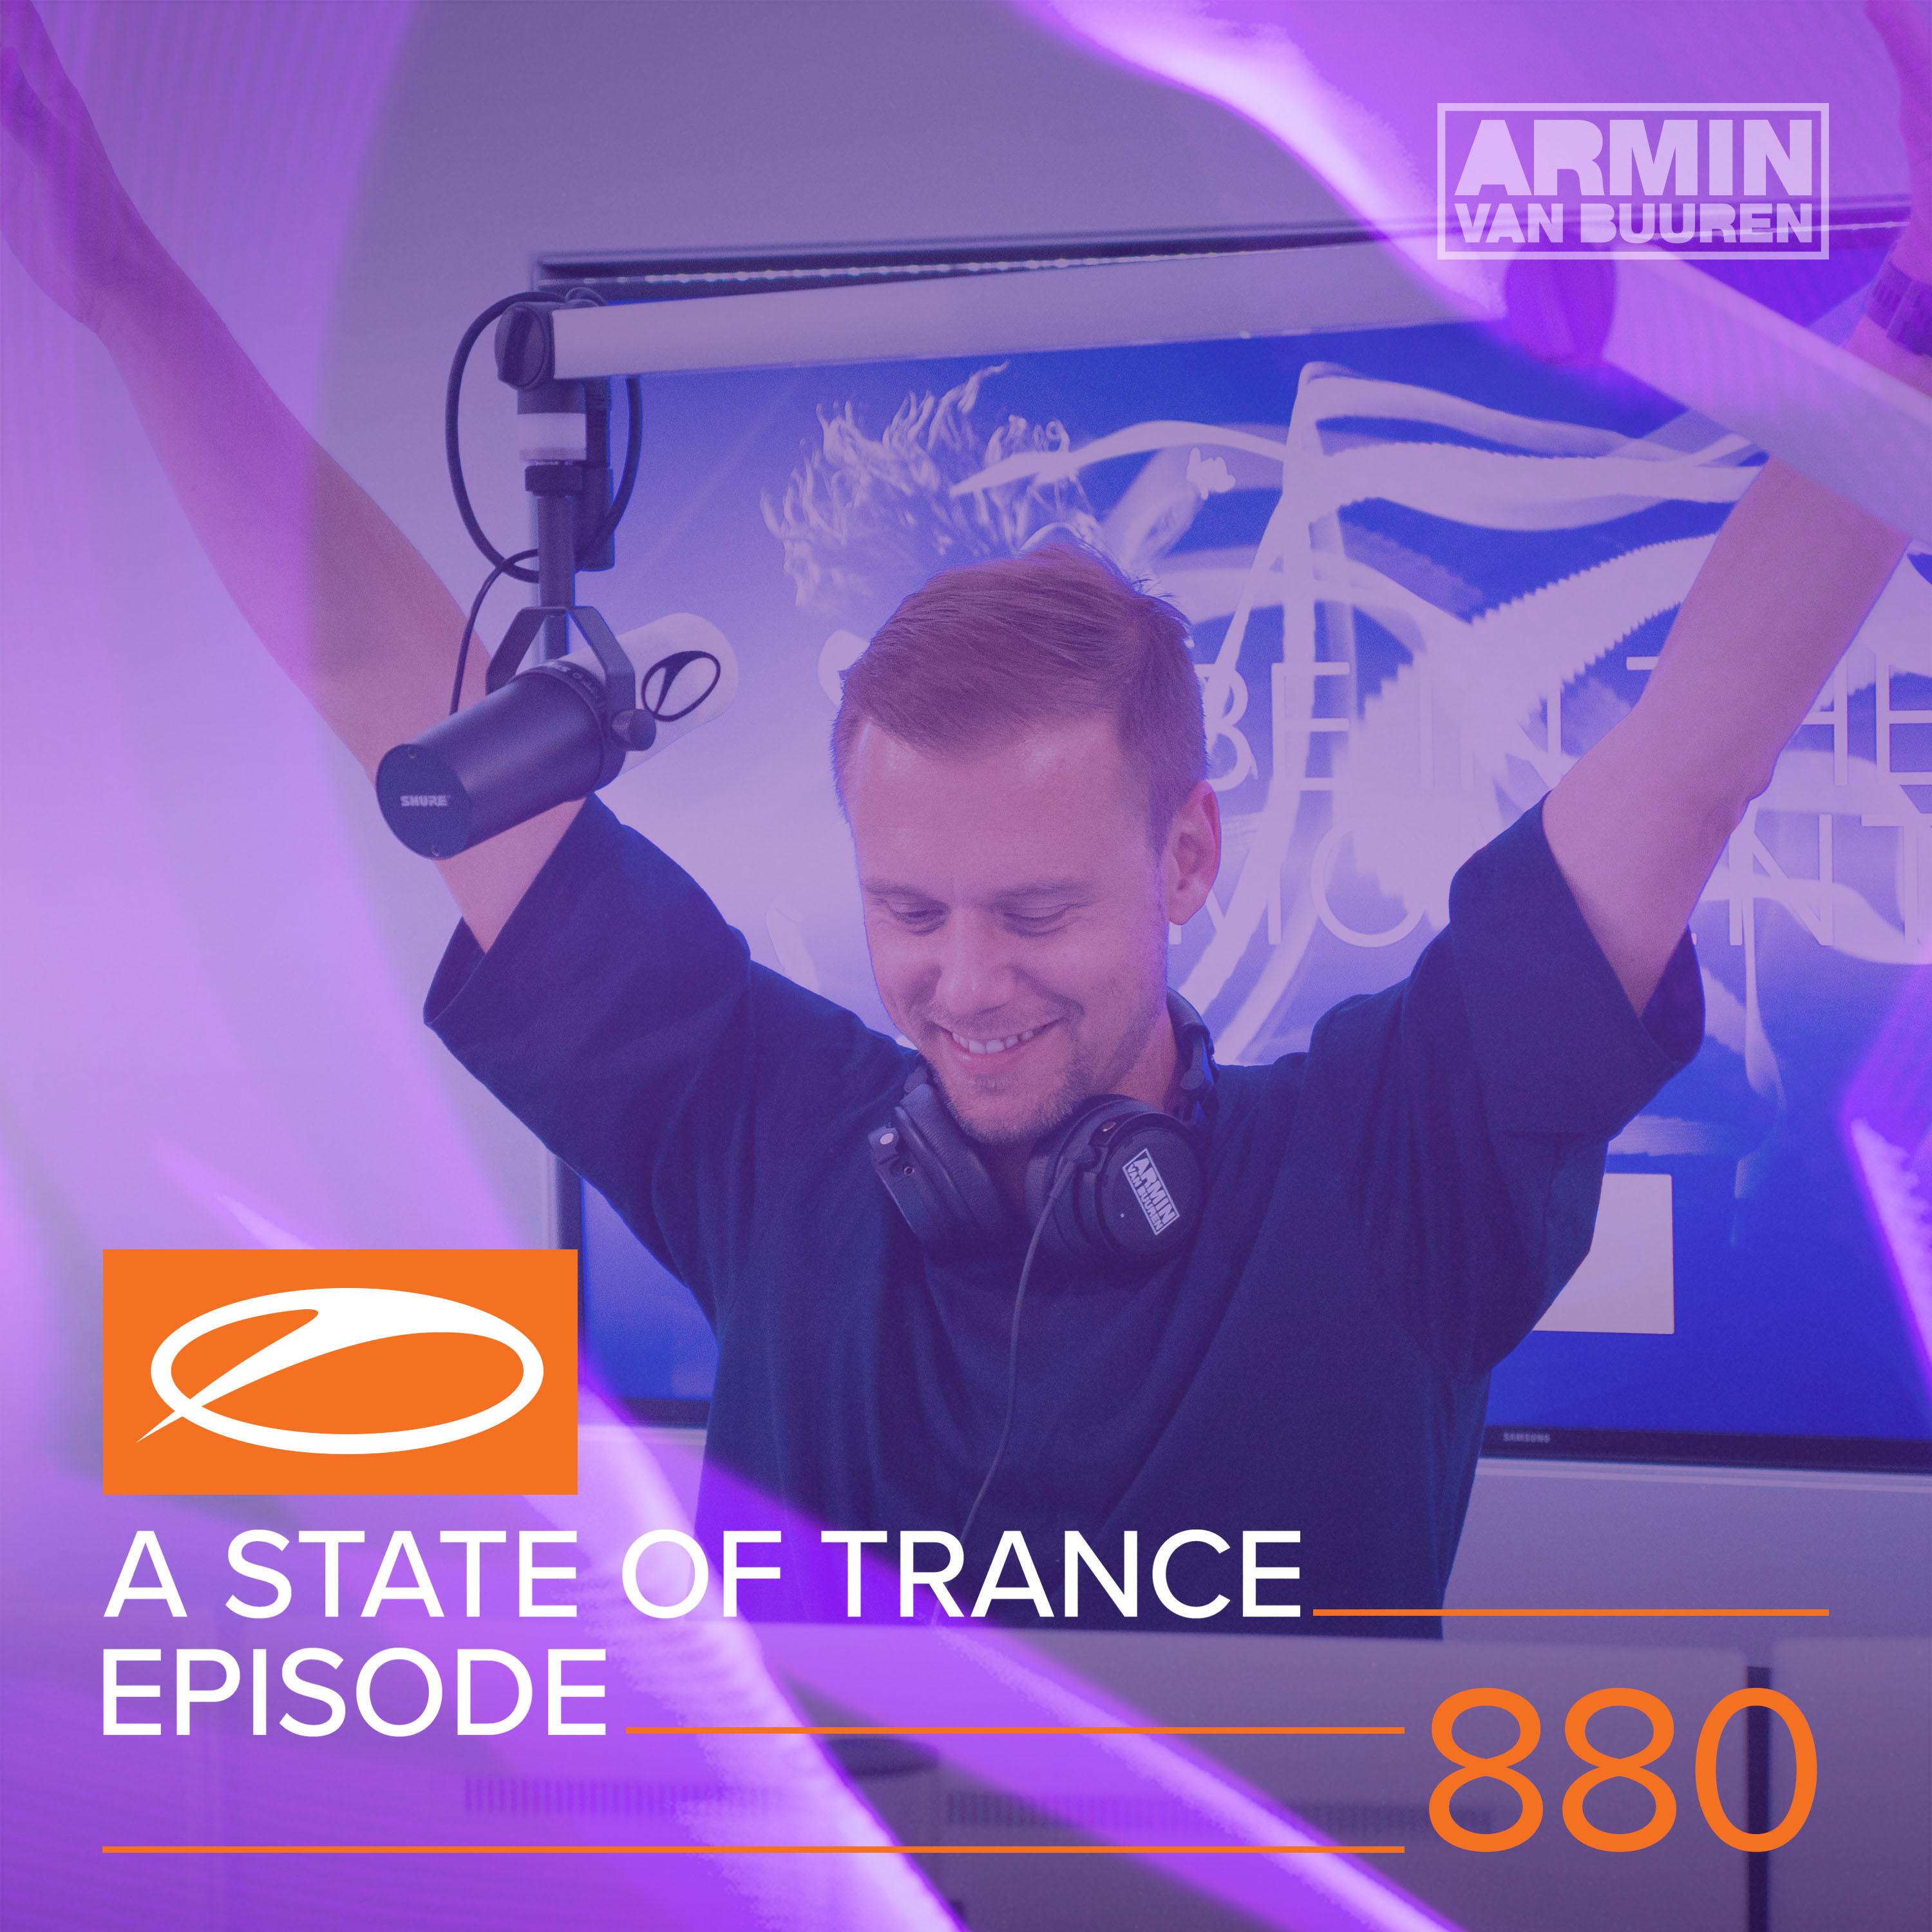 A State Of Trance (ASOT 880) (Track Recap, Pt. 4)